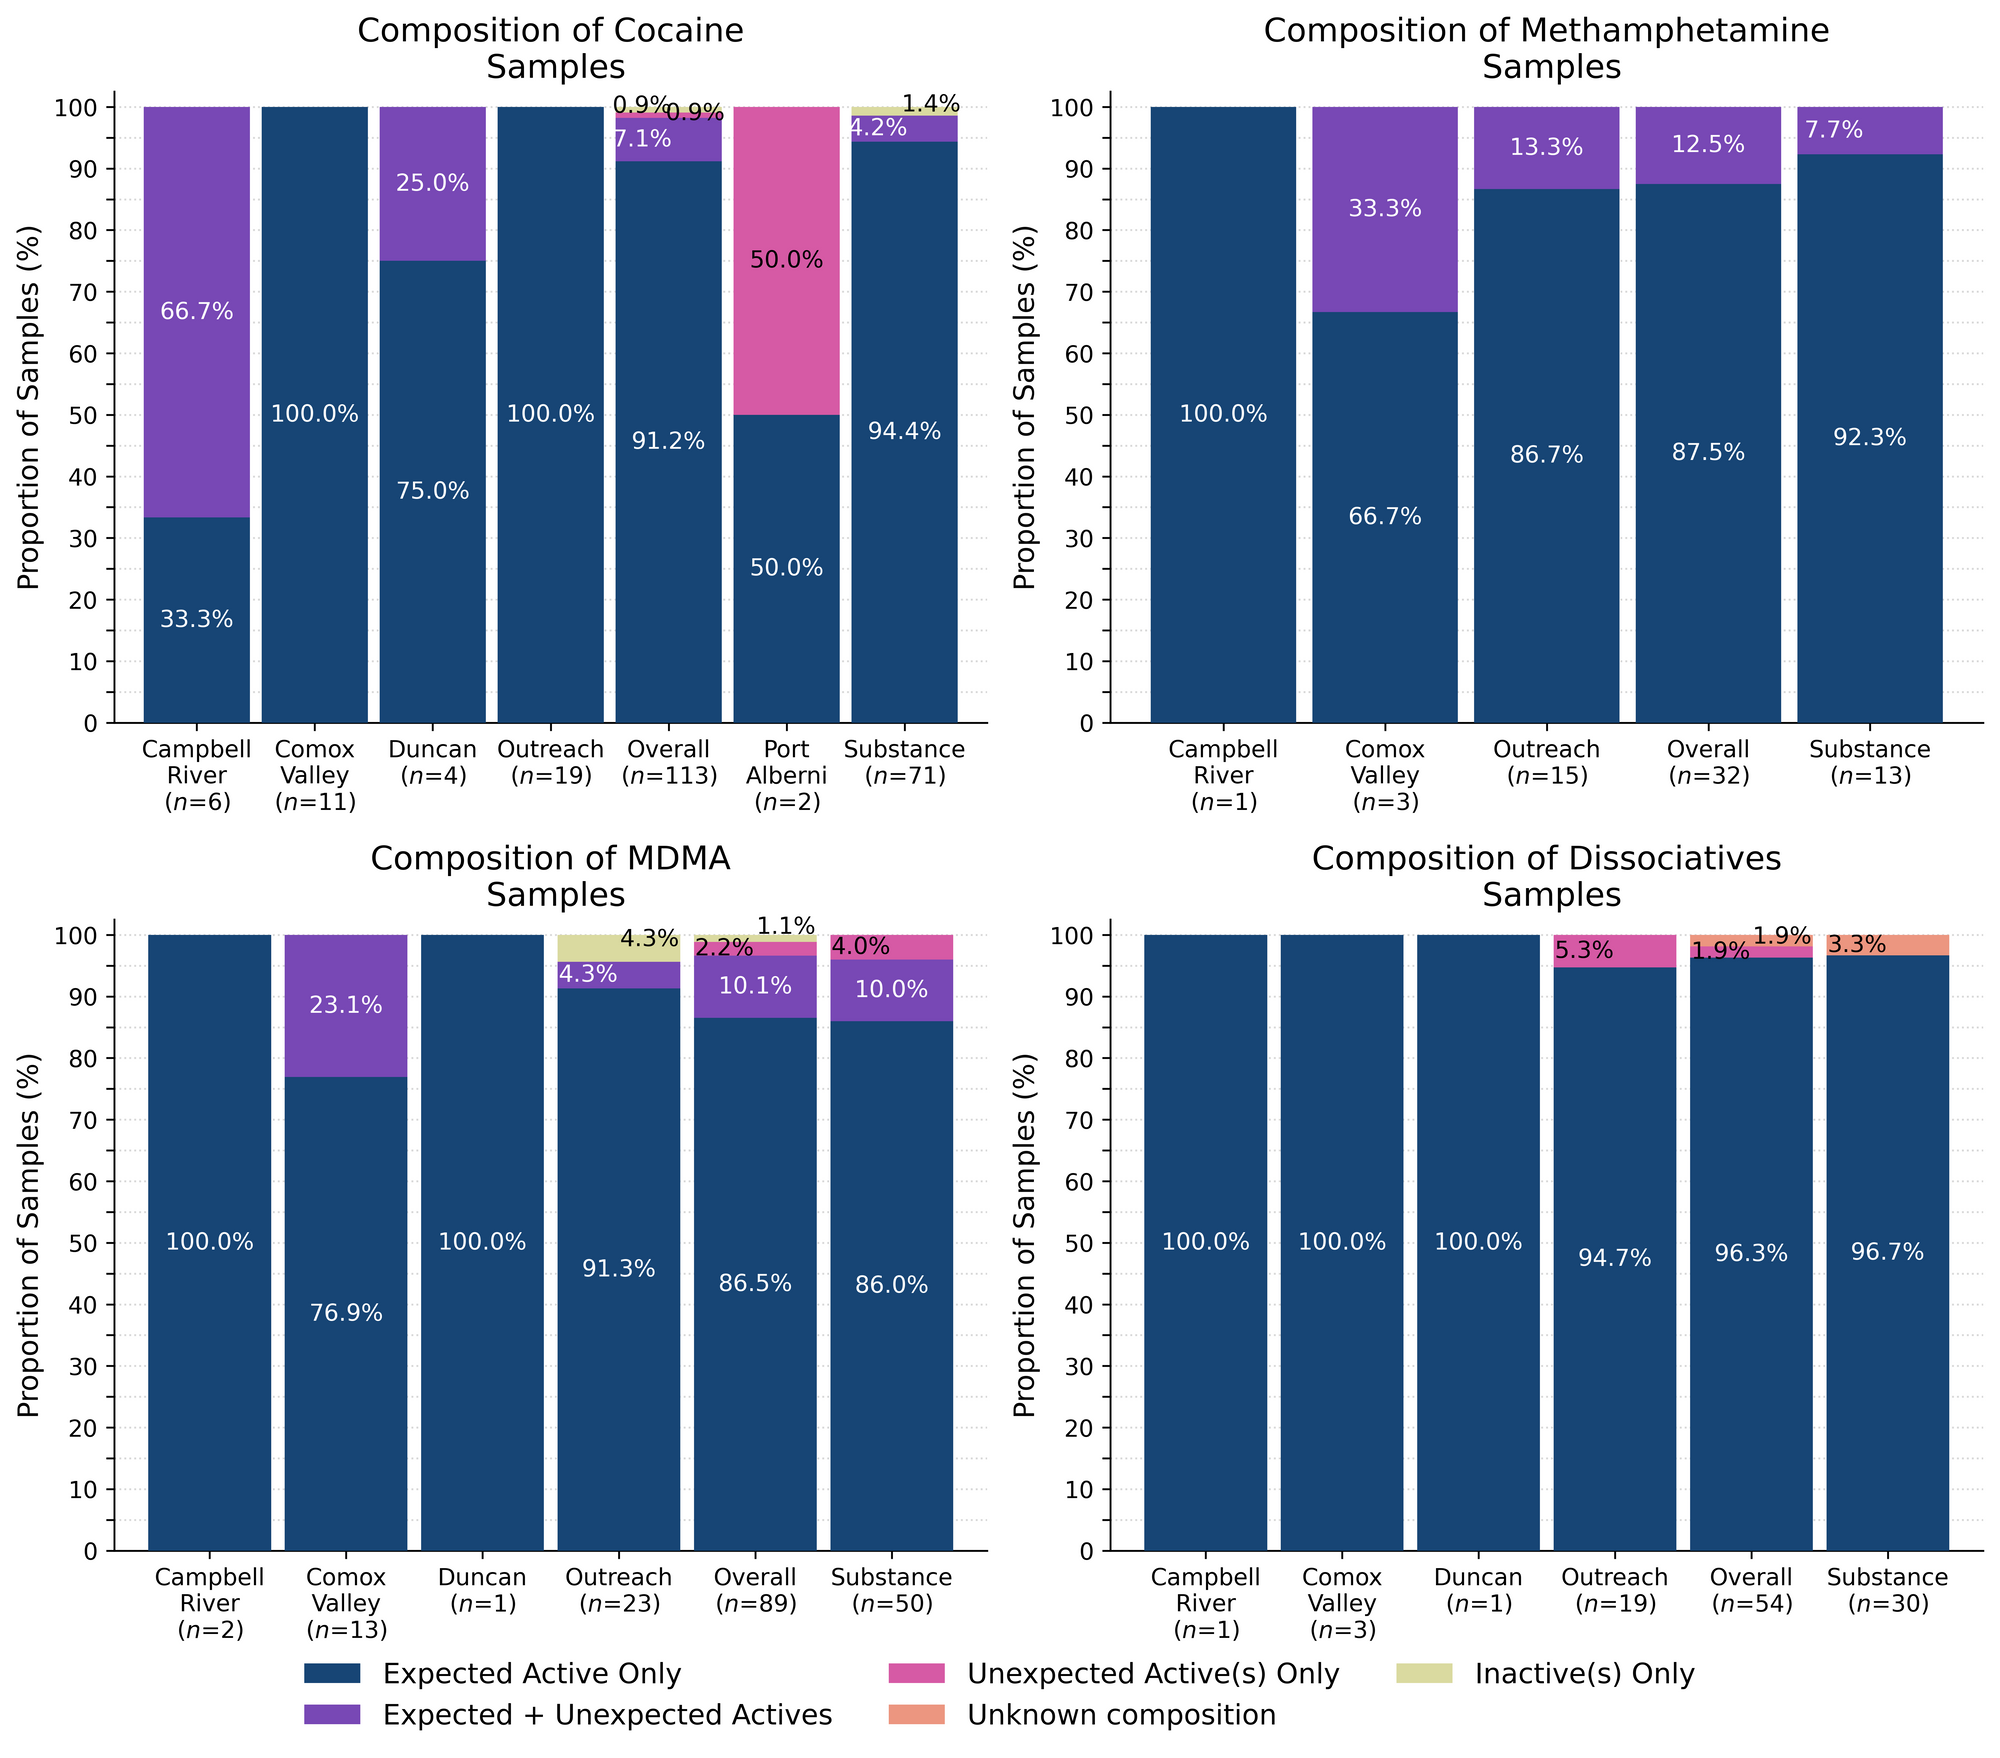 Figure 2. Compositional breakdown by drug class and sample collection location/method. Bars are stacked by the percentage of samples in each category, with the individual sample counts (and relative proportions) overlaid. “Dark Blue” groups samples that were *as expected* with no other notable compounds detected, “Purple” groups samples that contained the expected drug and contained other unexpected active(s), “Magenta” groups samples that did not contain the expected active but did contain unexpected active(s), Salmon groups samples where we were unable to determine the composition (e.g. scenarios where we do not have appropriate reference spectra), and Lime displays samples where no active compounds were detected.